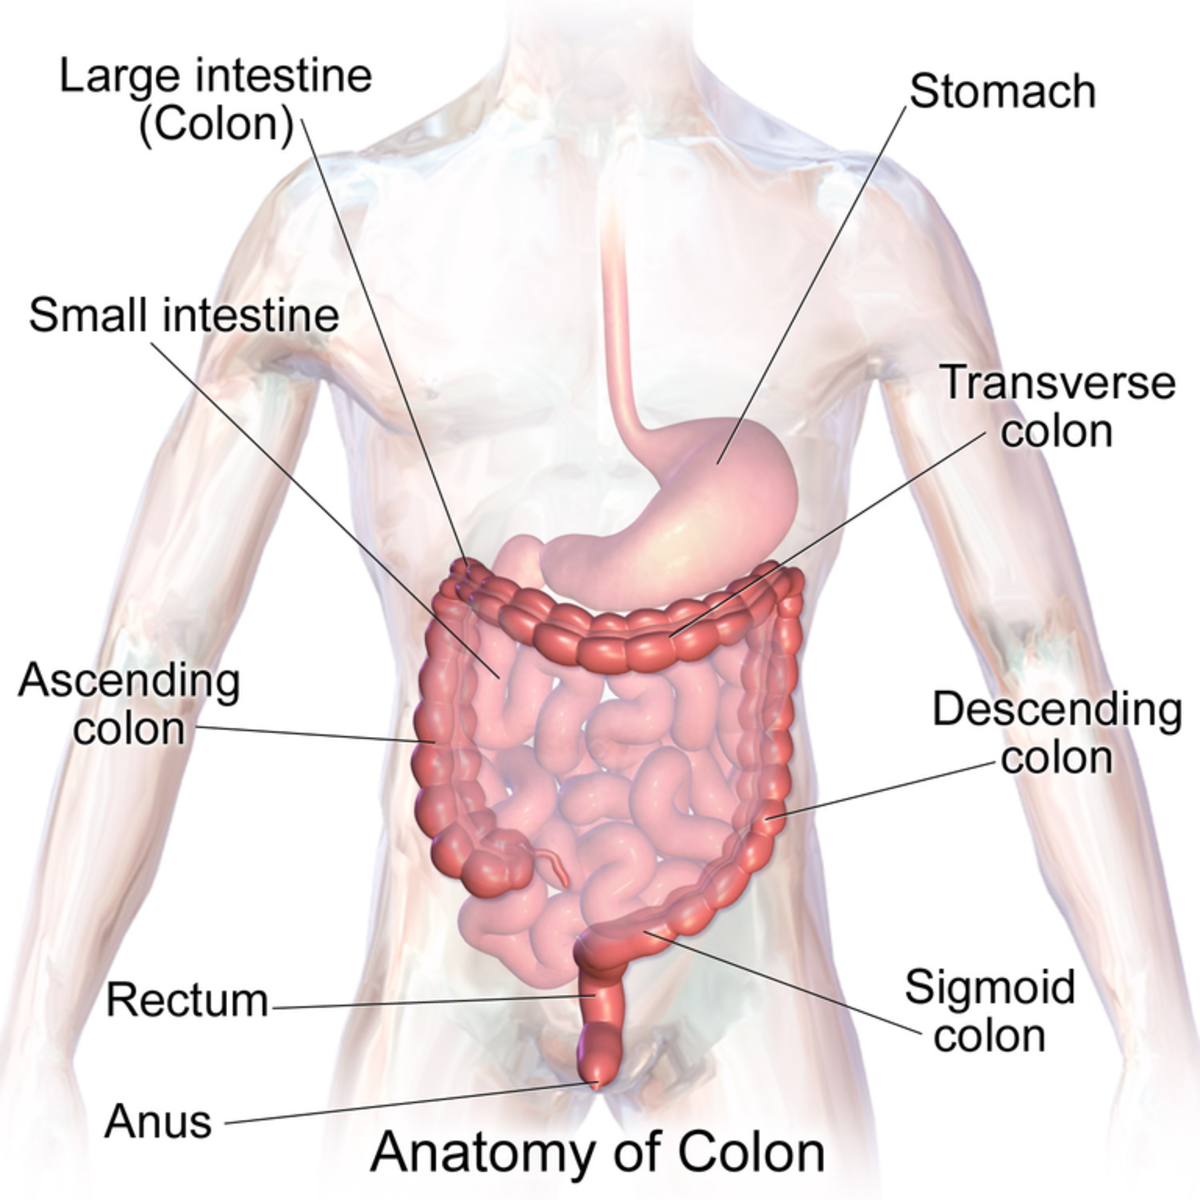 The stomach, small intestine, and large intestine; the longest part of the large intestine is the colon